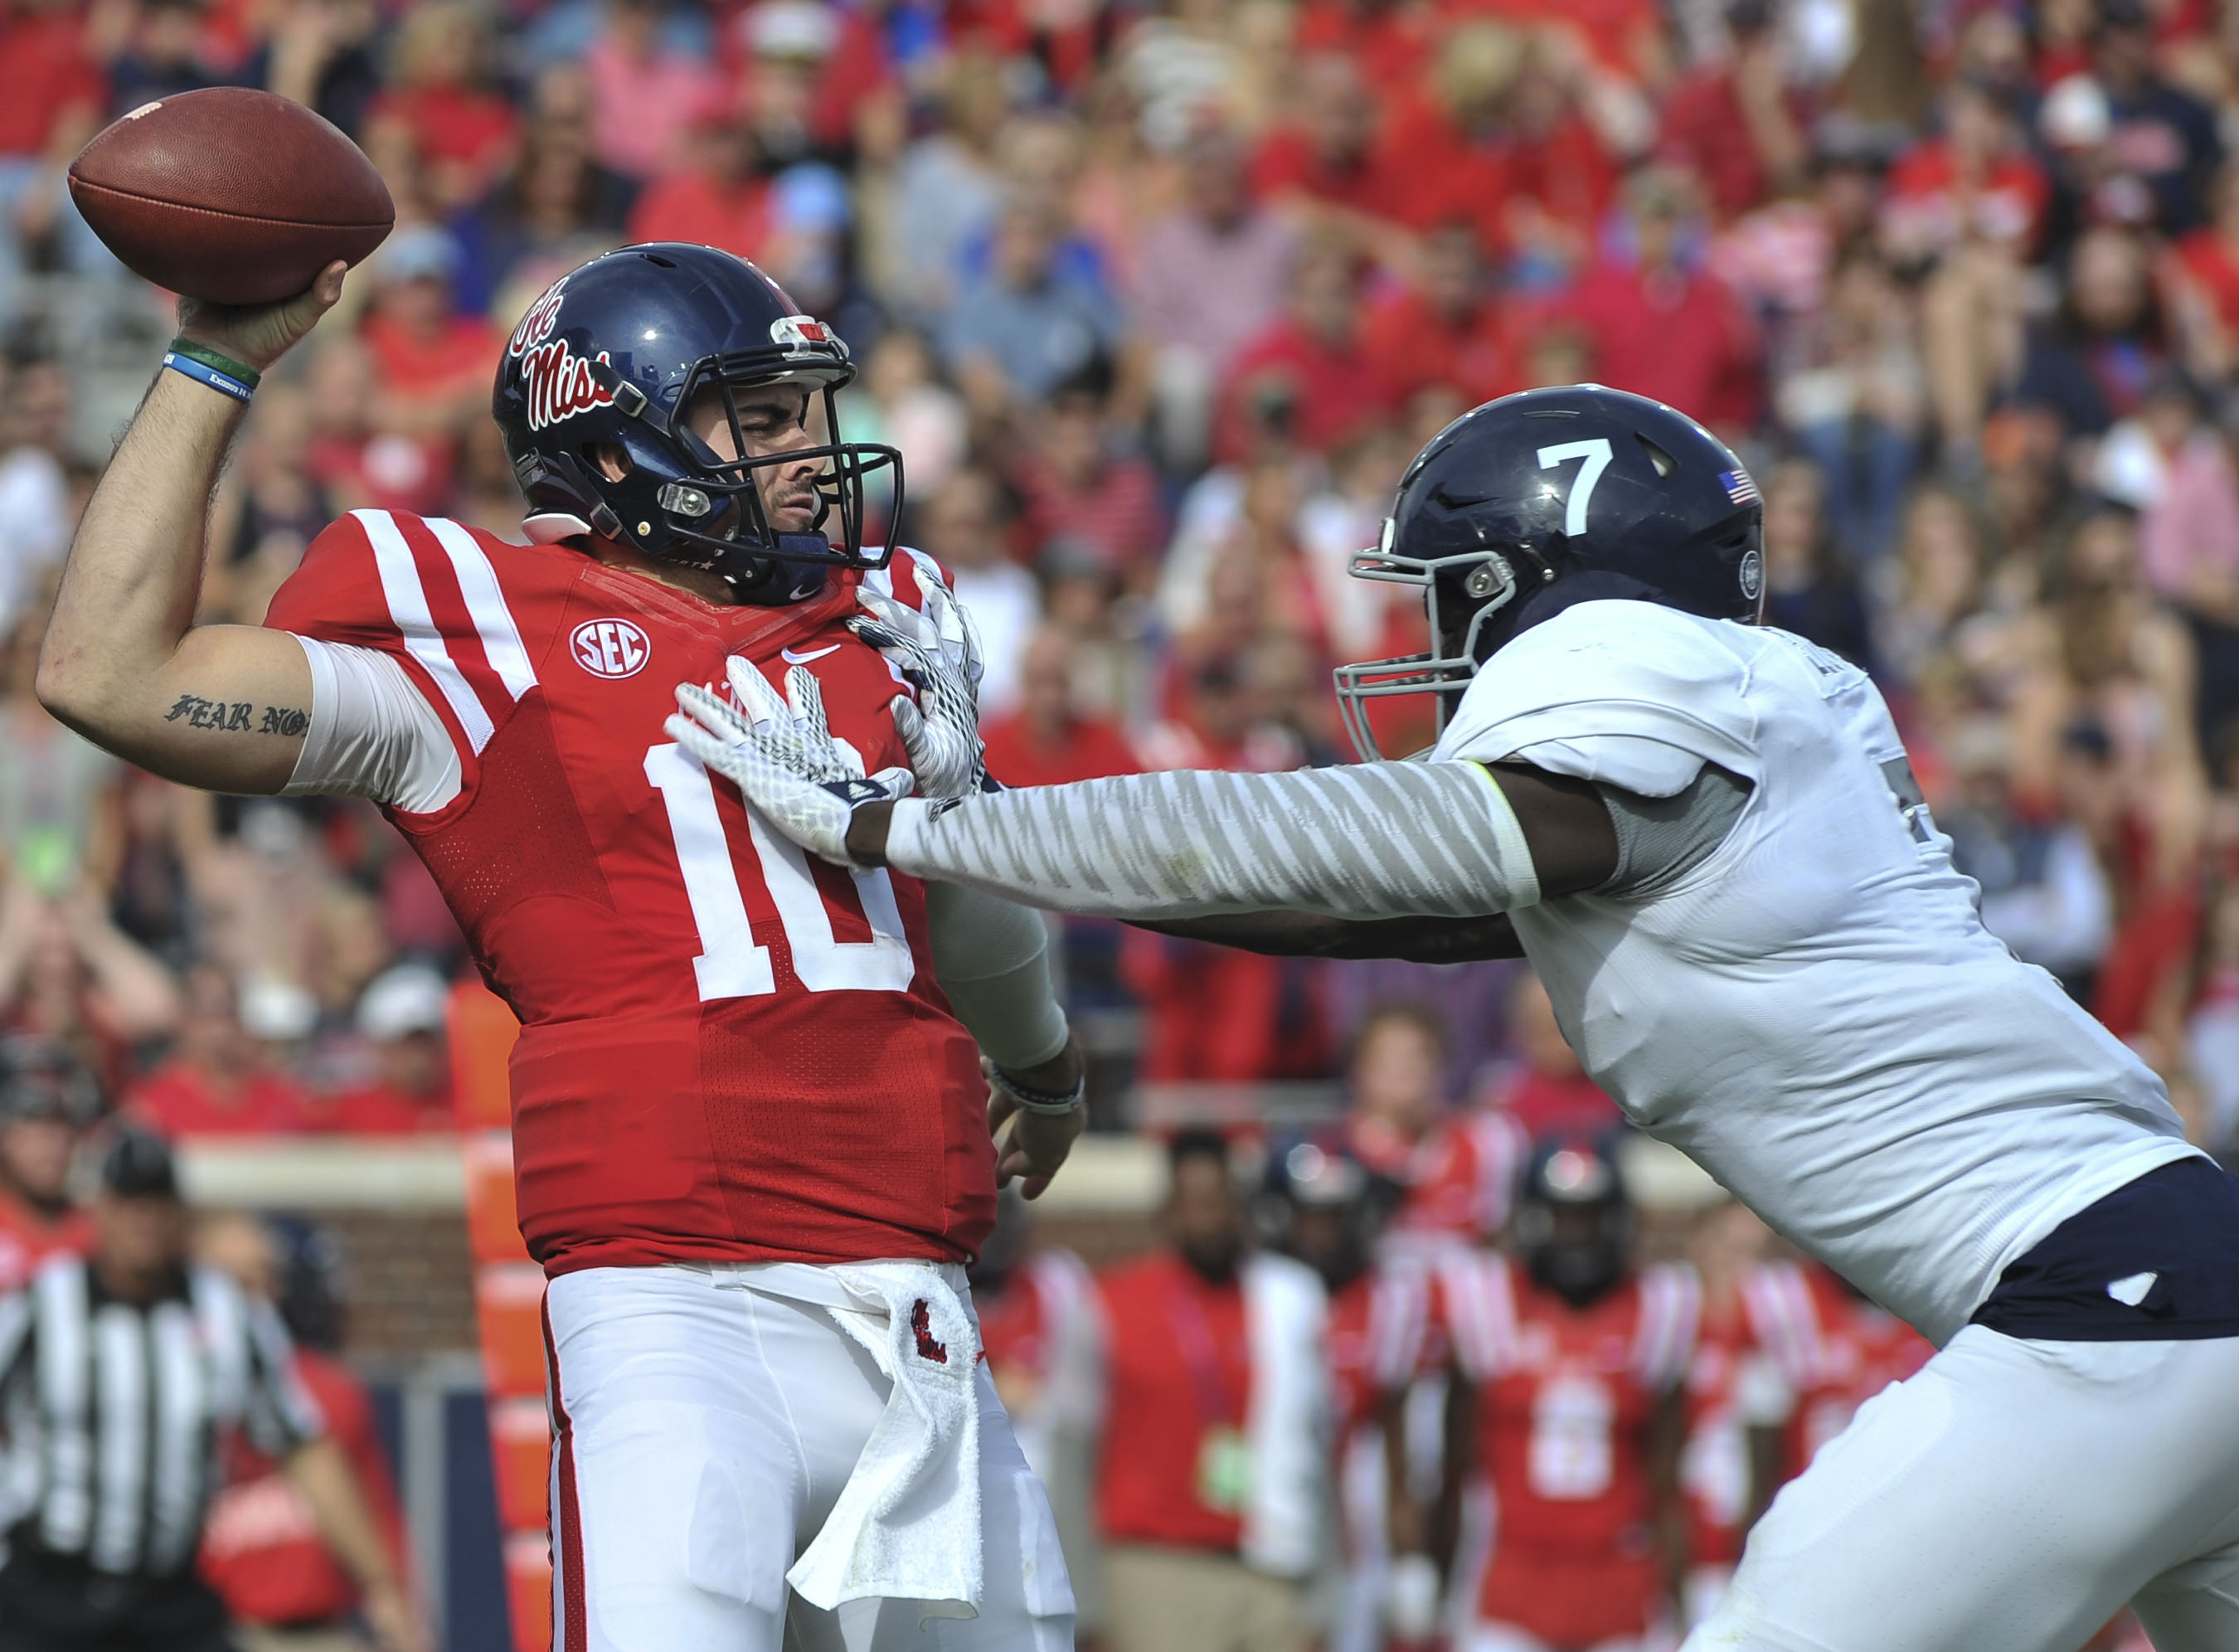 Nov 5, 2016; Oxford, MS, USA; Mississippi Rebels quarterback Chad Kelly (10) is hurried by Georgia Southern Eagles linebacker Ukeme Eligwe (7) during the first half at Vaught-Hemingway Stadium. Mandatory Credit: Justin Ford-USA TODAY Sports